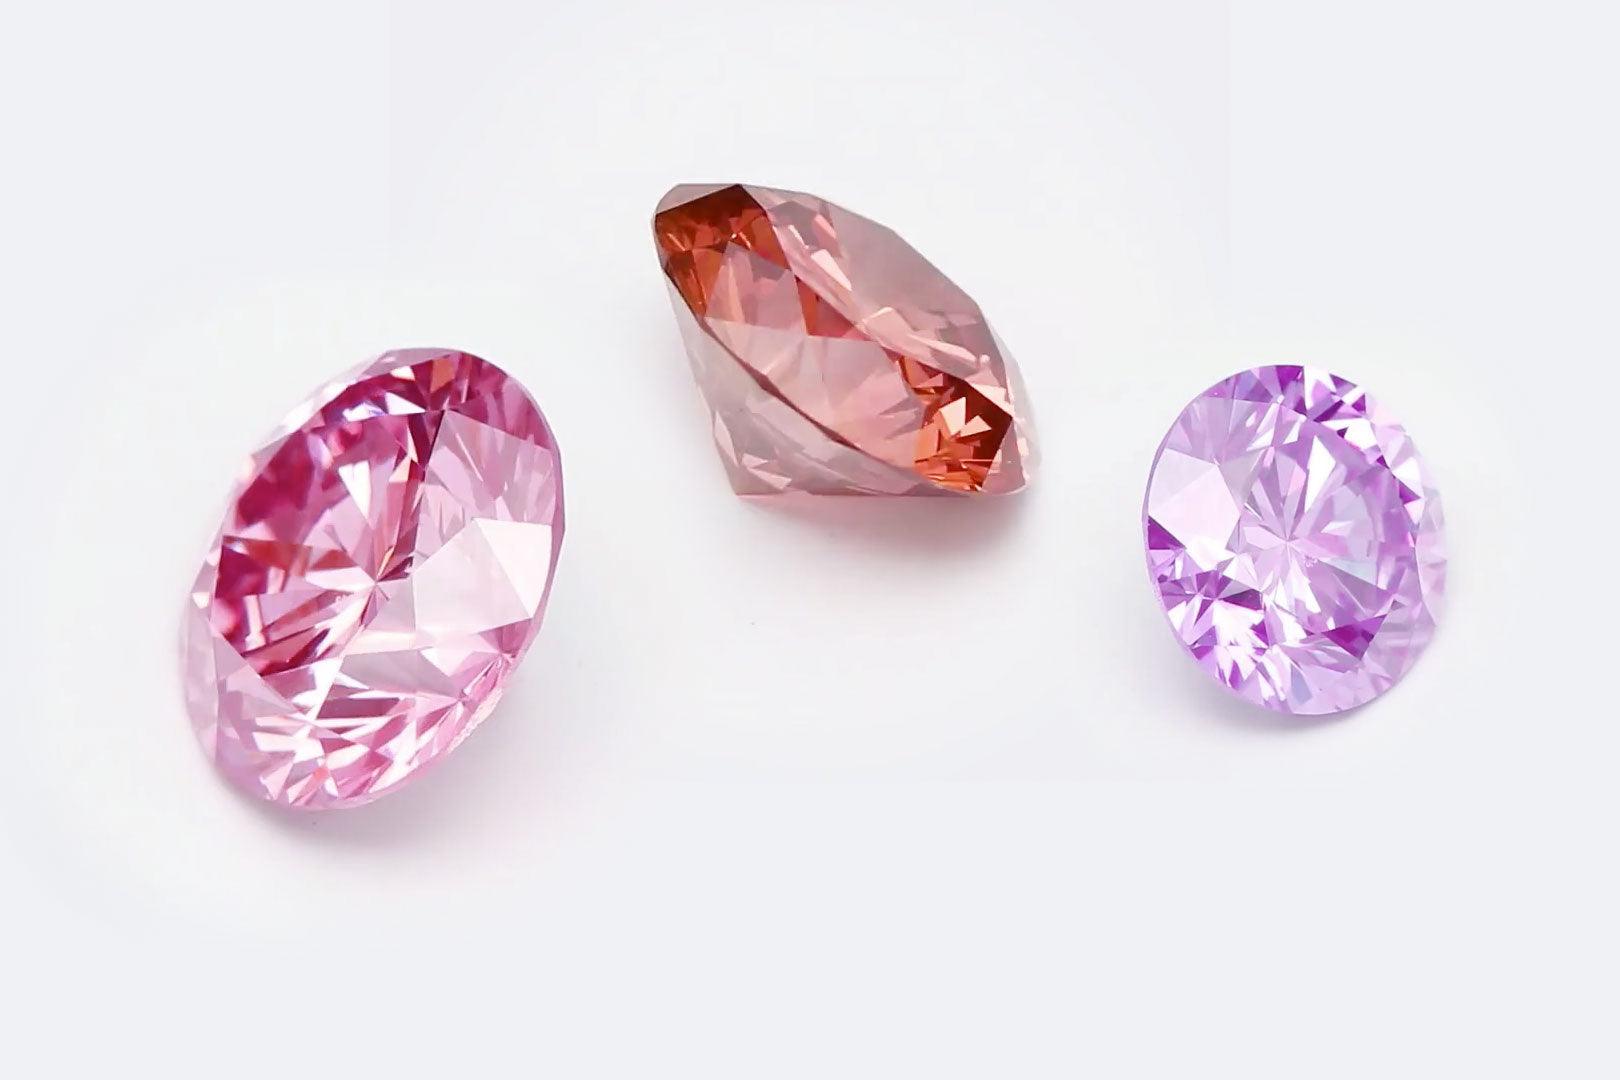 Colored Diamond Gift Guide - New World Diamonds - fine jewelry, engagement rings and great gifts